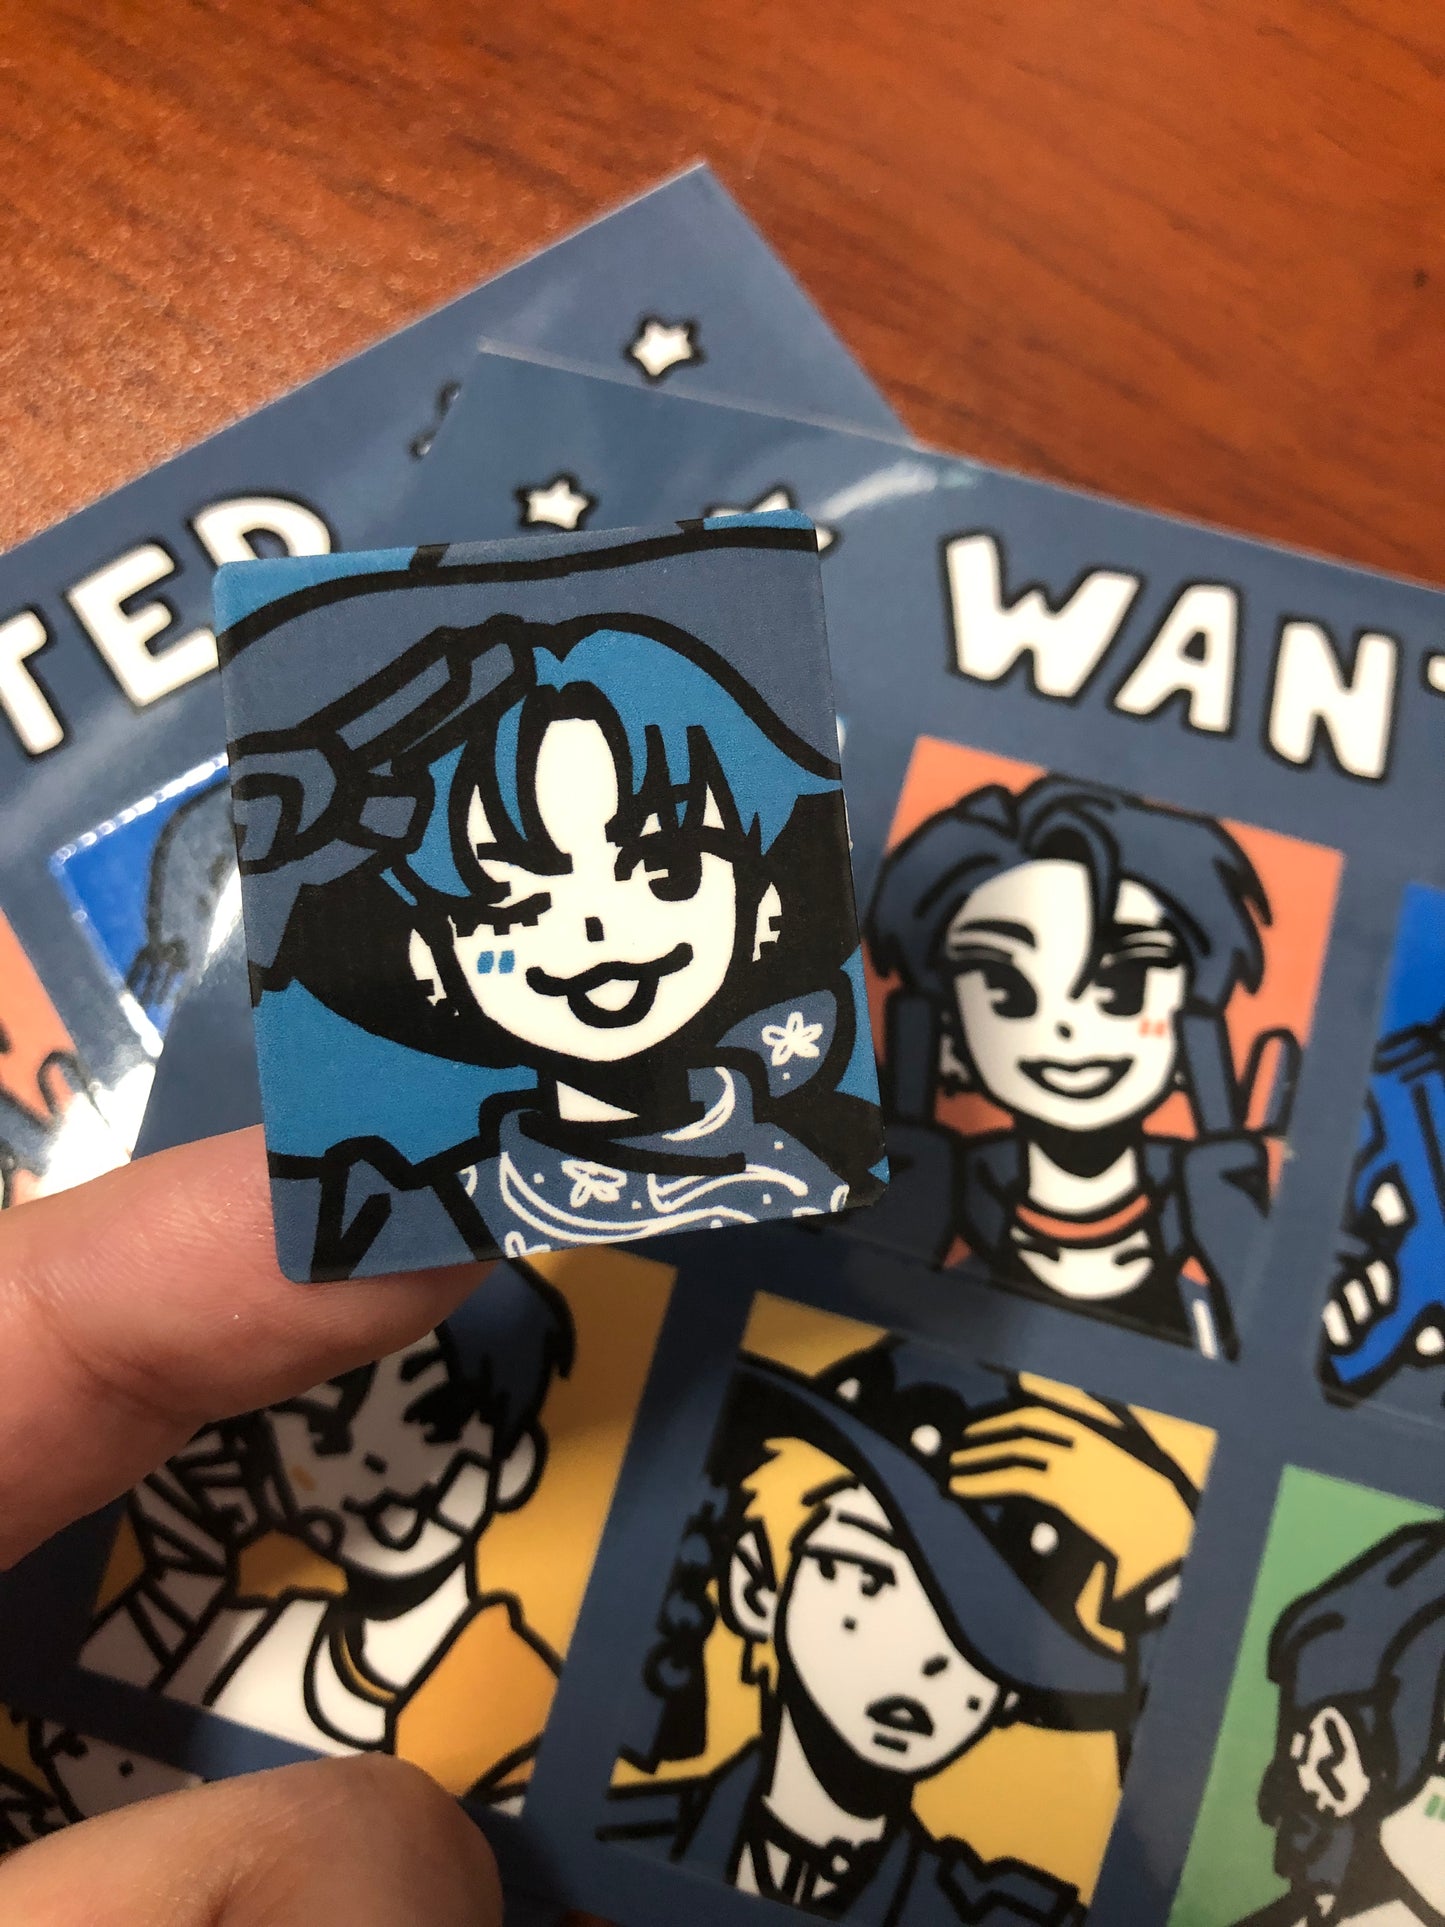 Wanted Sticker Sheets